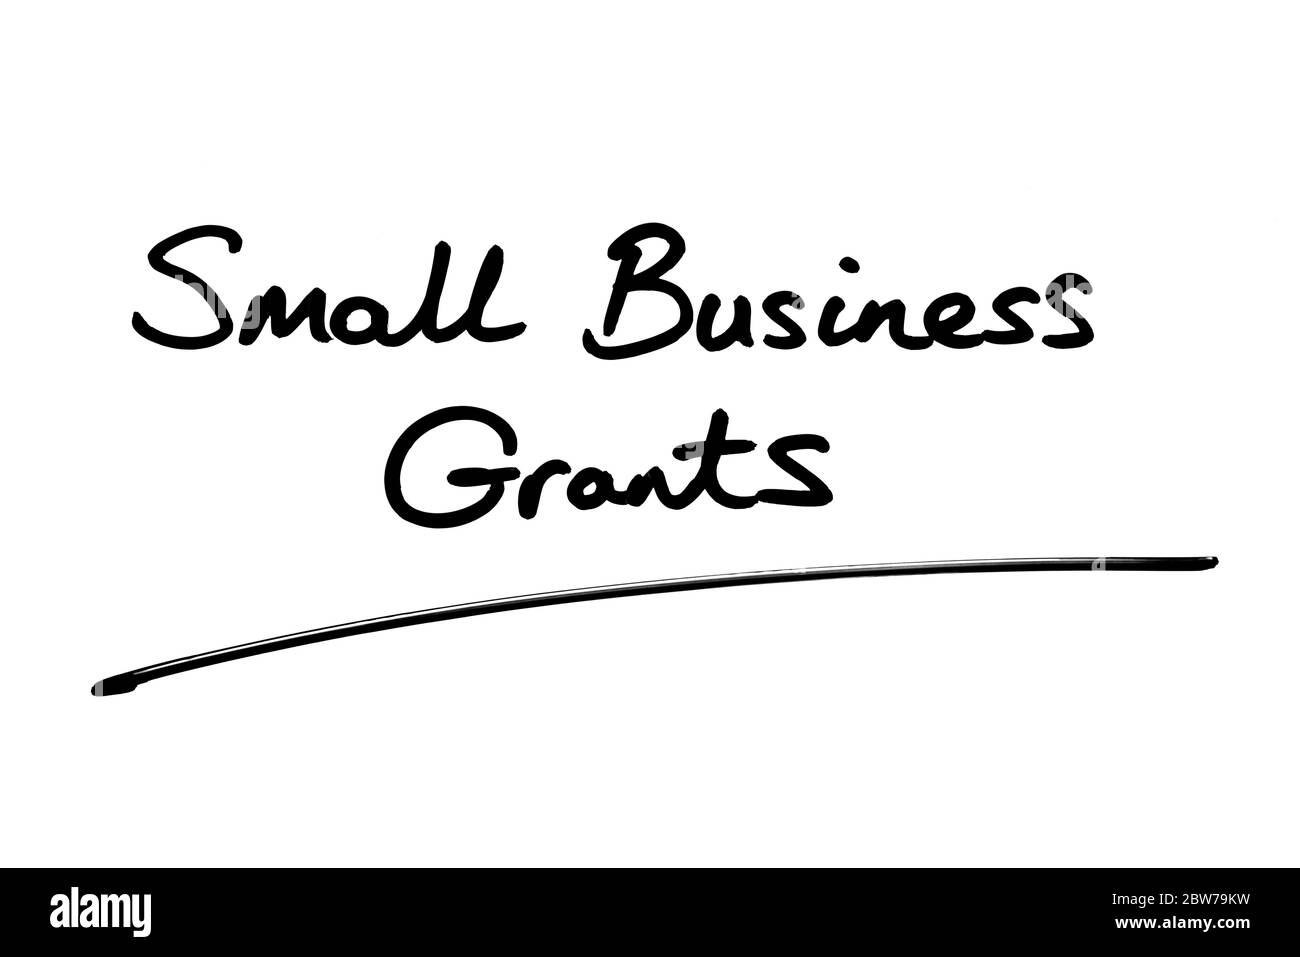 Small Business Grants handwritten on a white background. Stock Photo